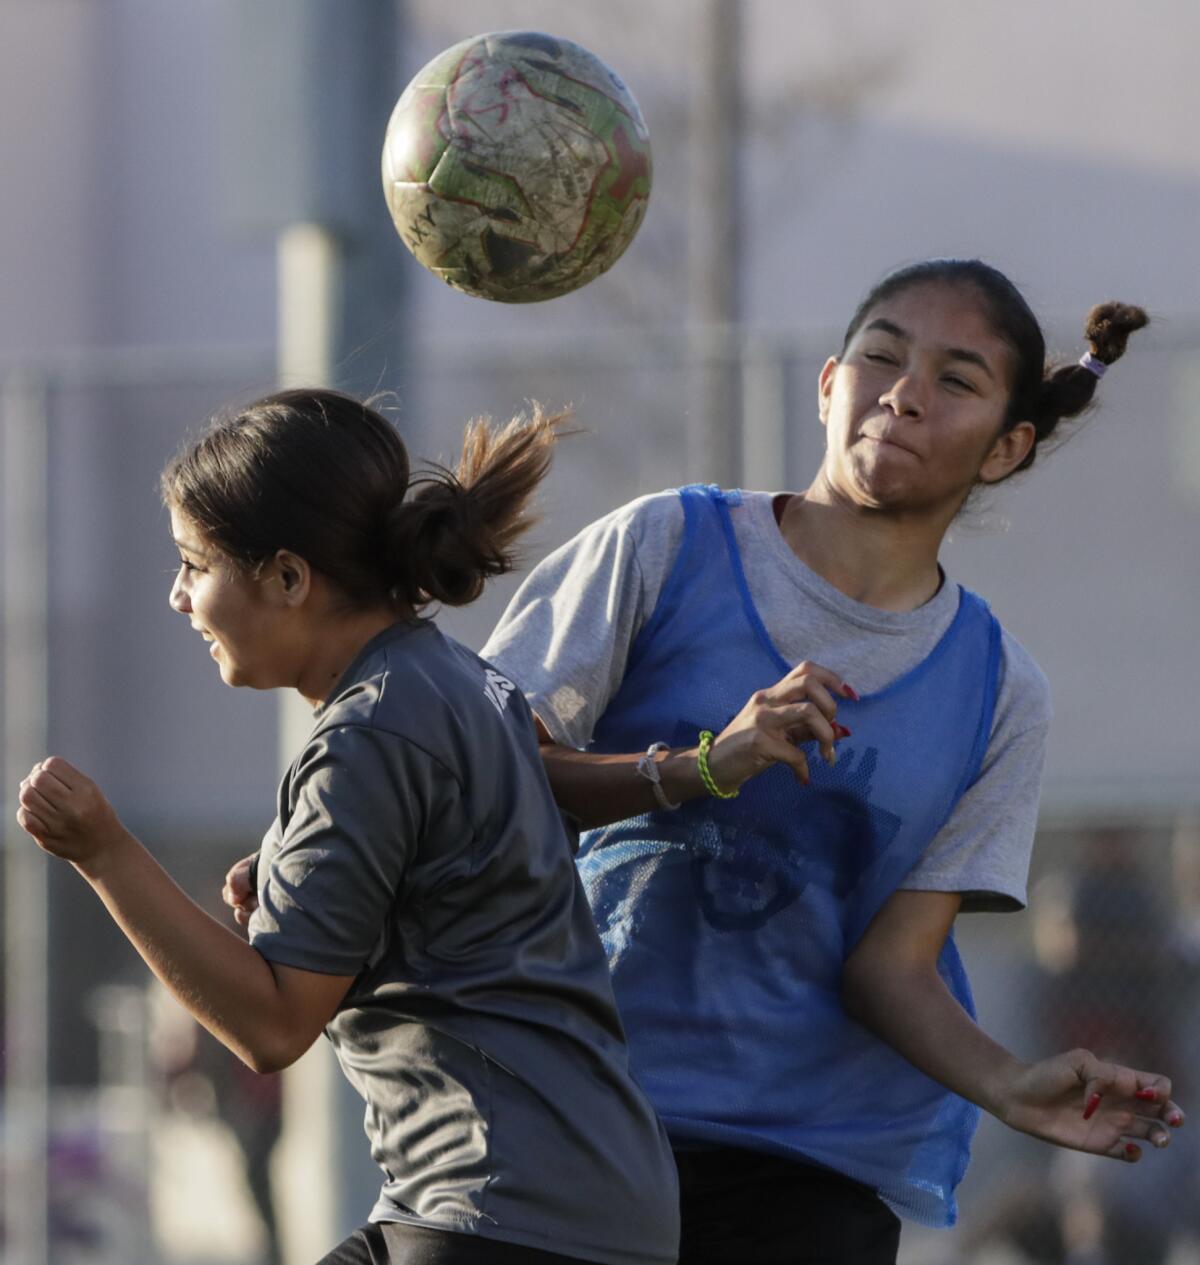 Marianna Hernandez, left, and Ashley Silva of the Downtown LA Soccer Club practice at Liechty Middle School.